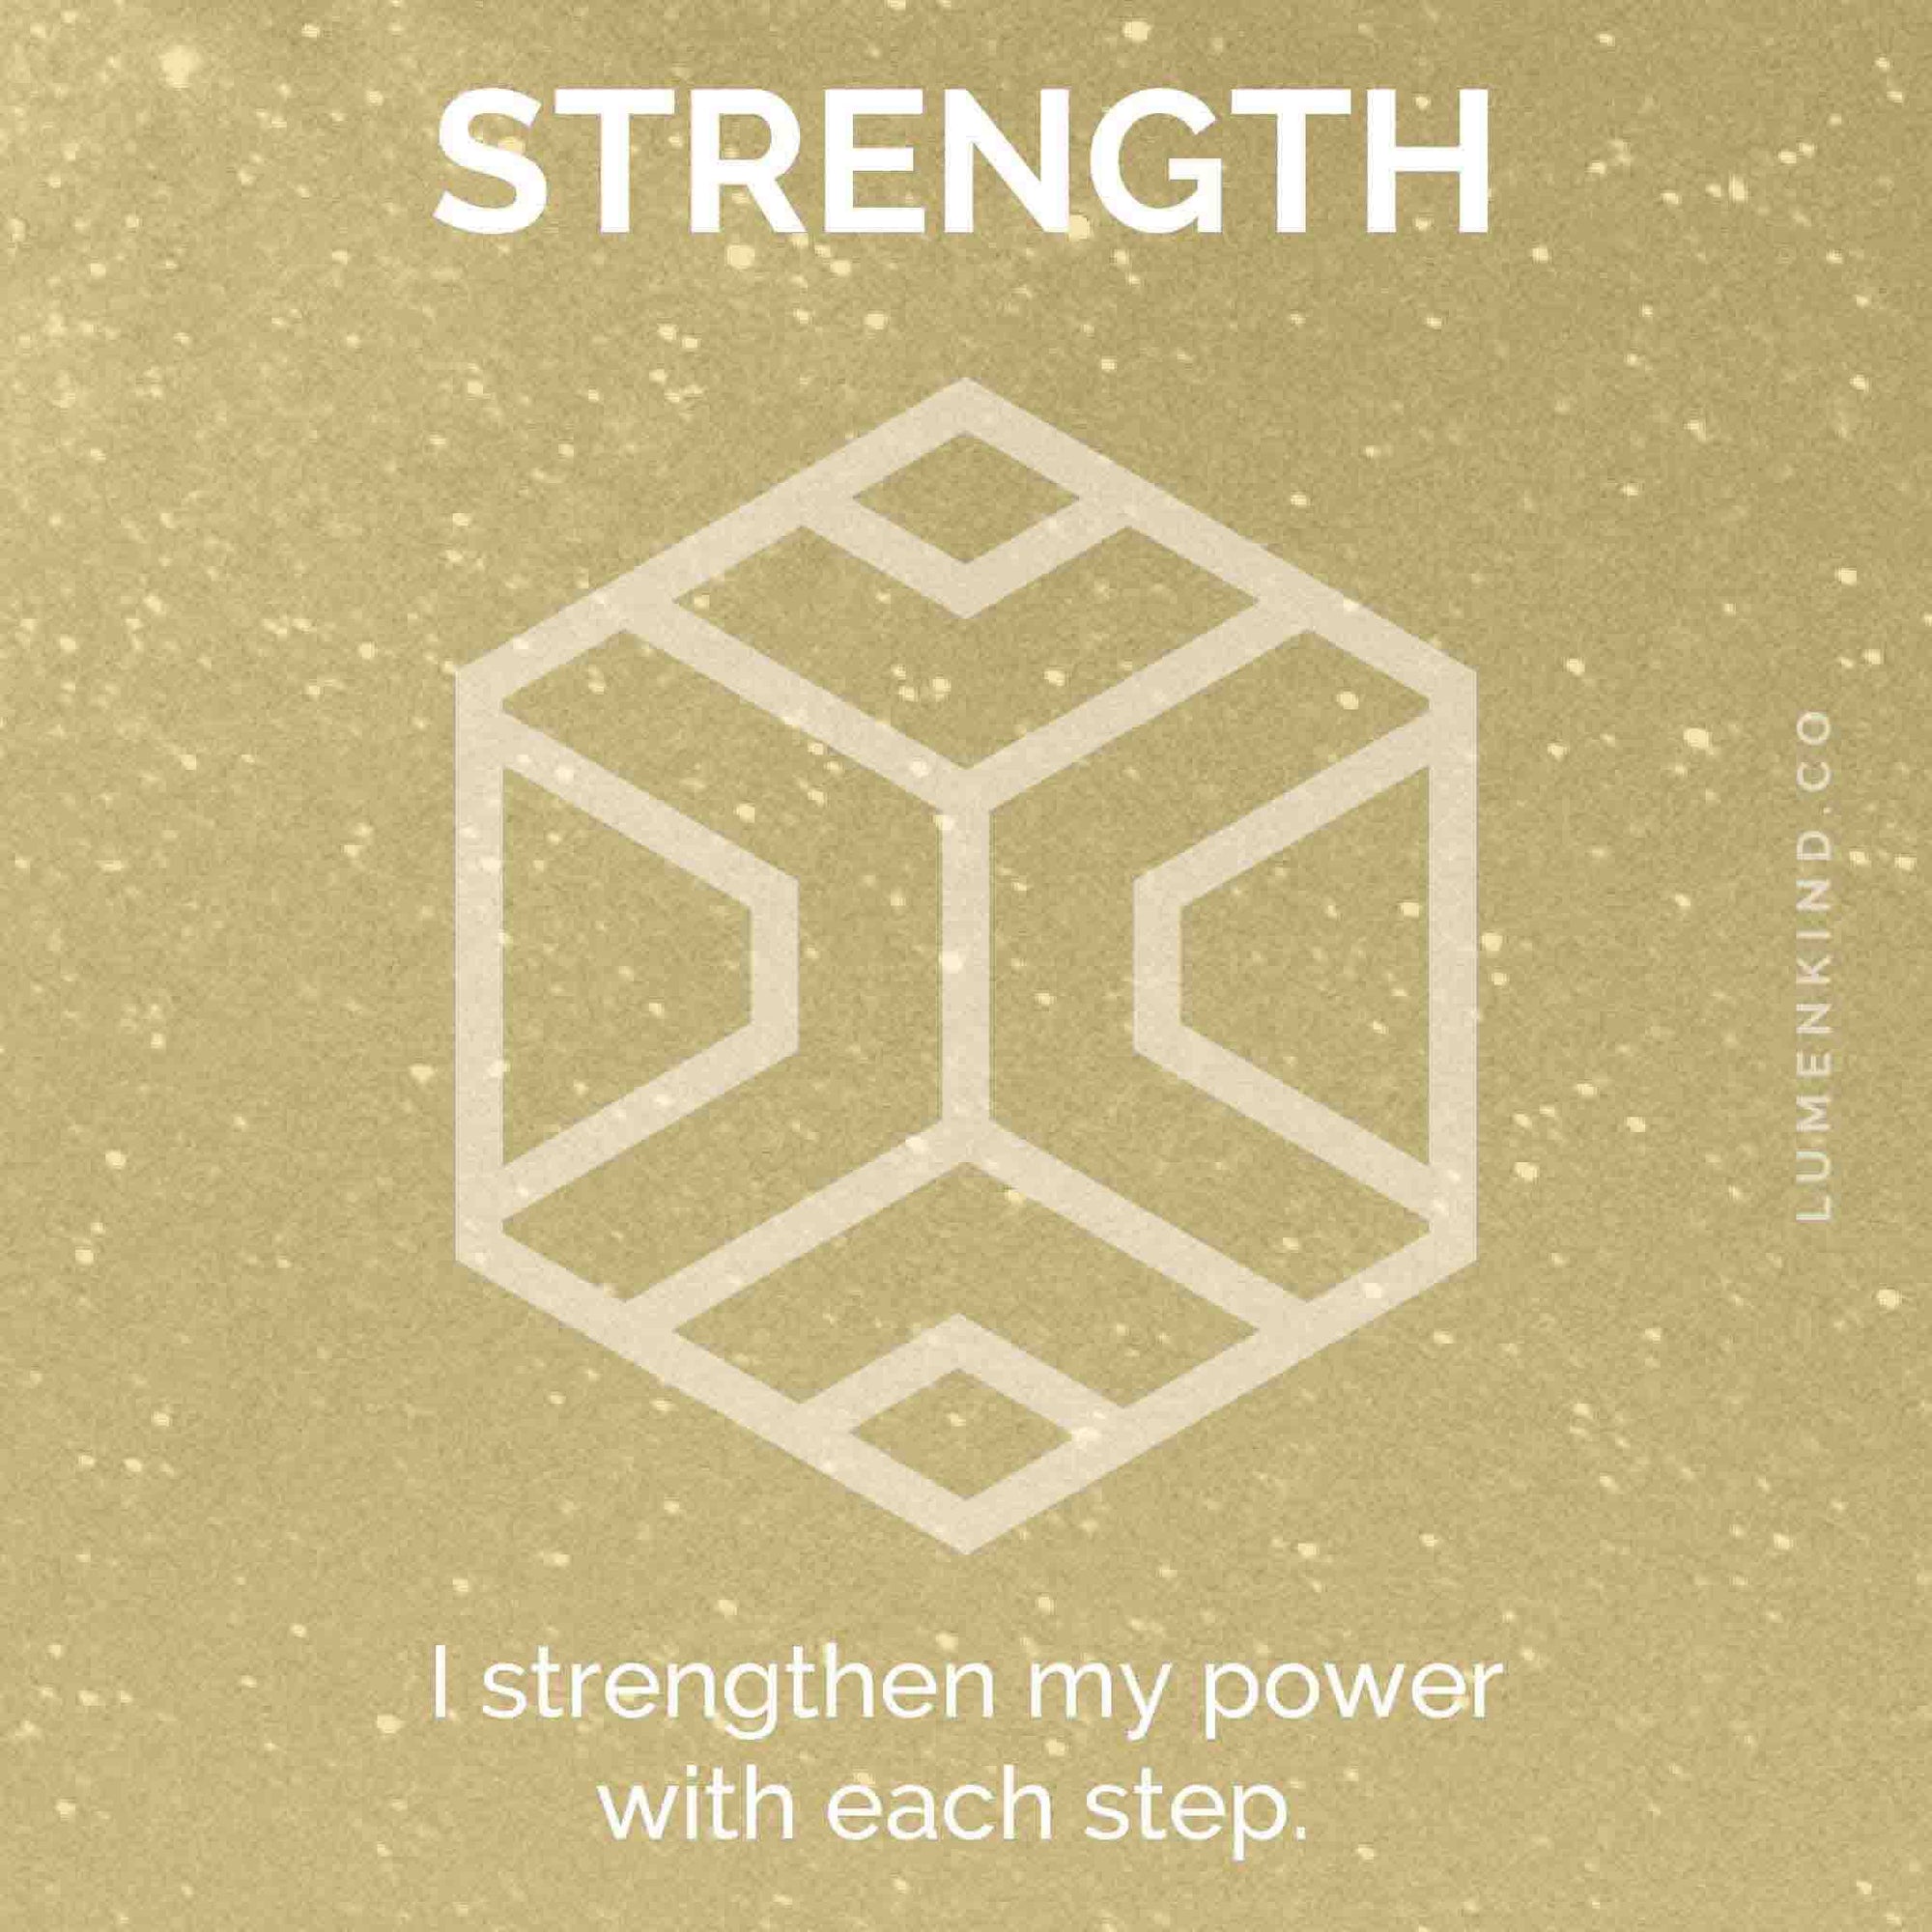 The suggested intention is STRENGTH. I strengthen my power with each step. 